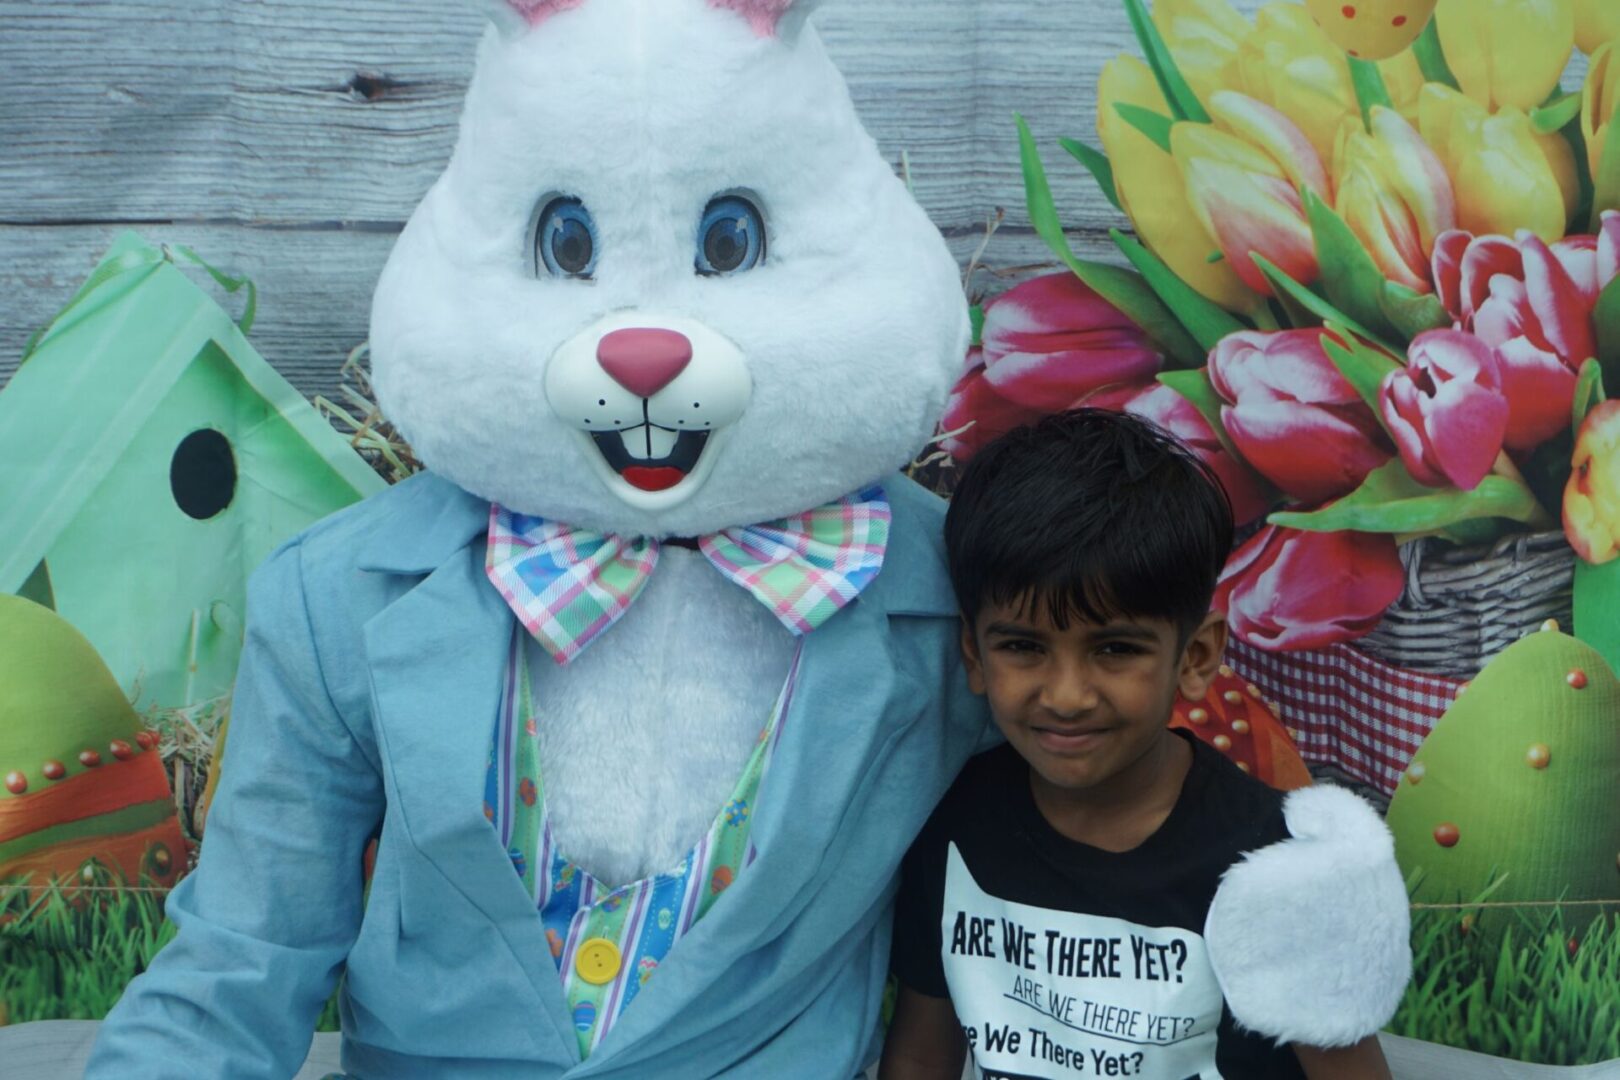 The bunny mascot and a boy in black shirt